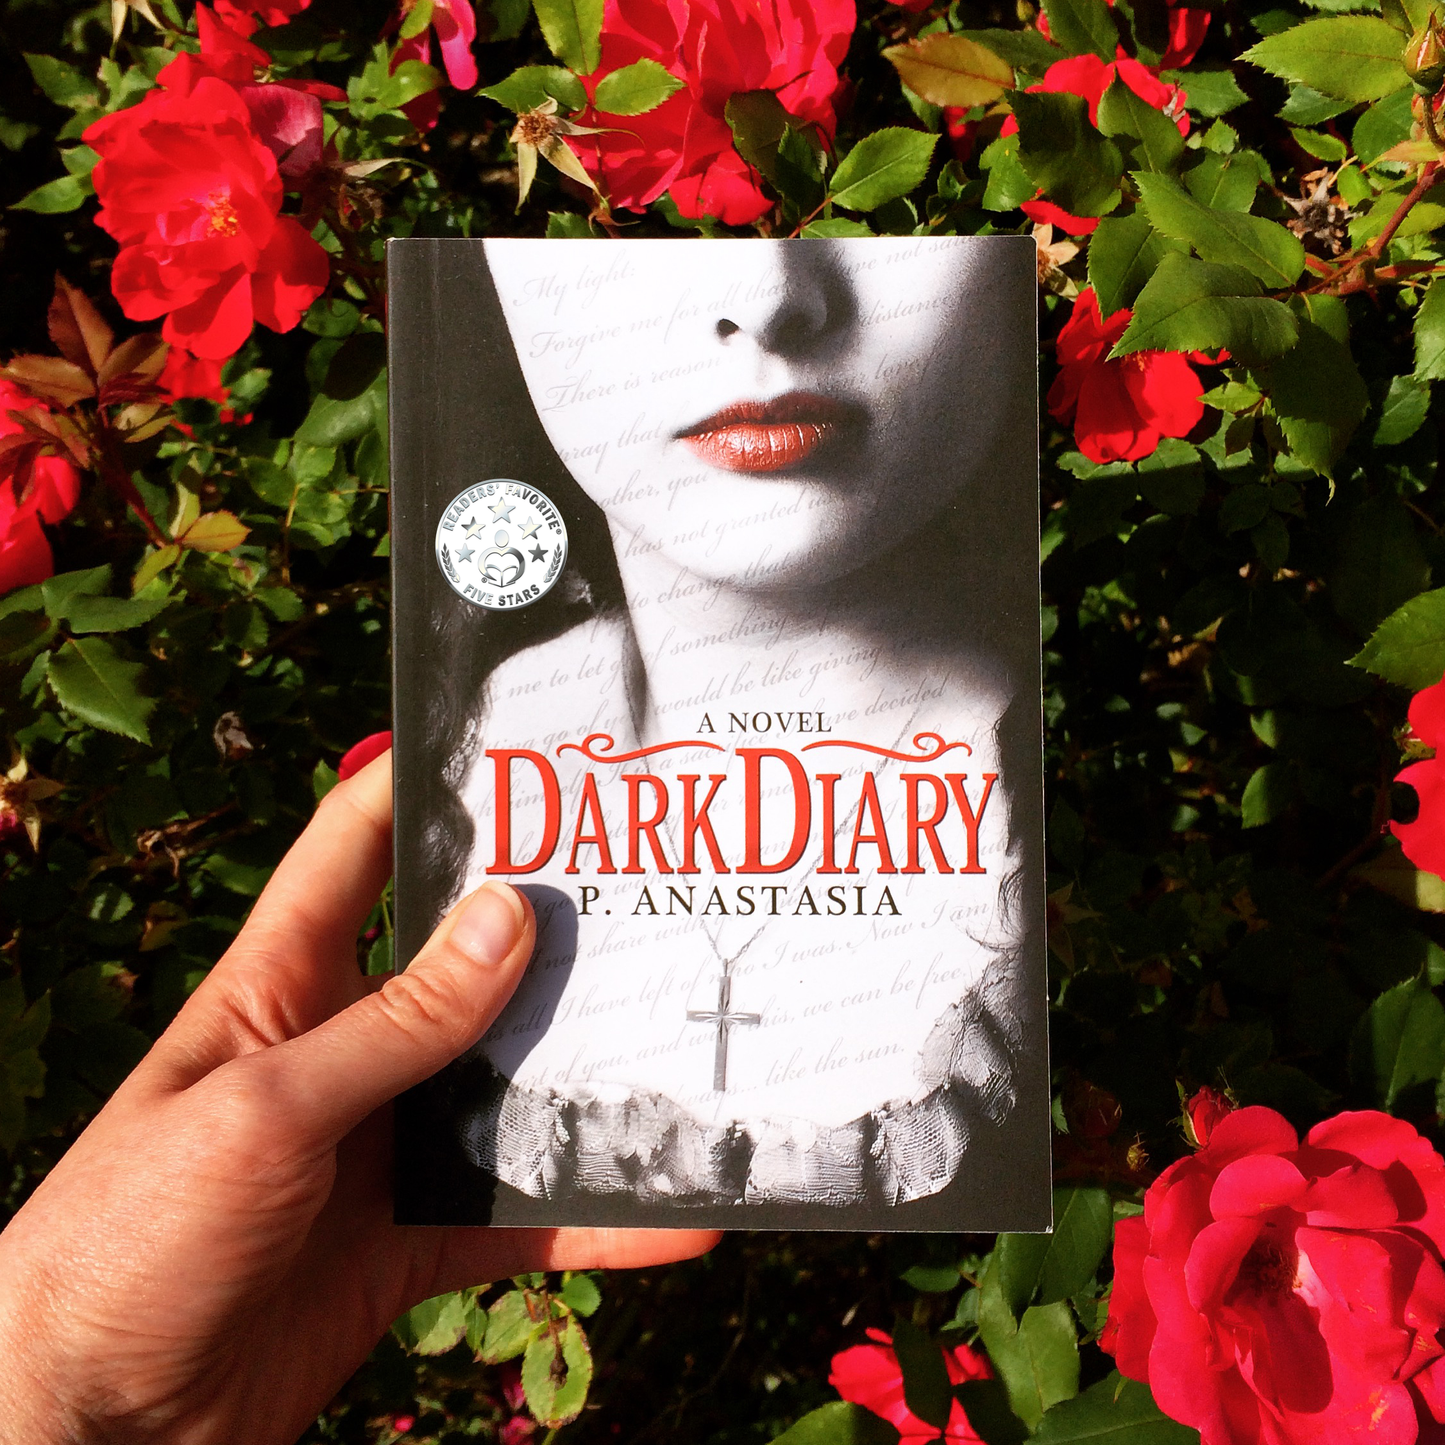 SIGNED Dark Diary Special Edition HARDCOVER